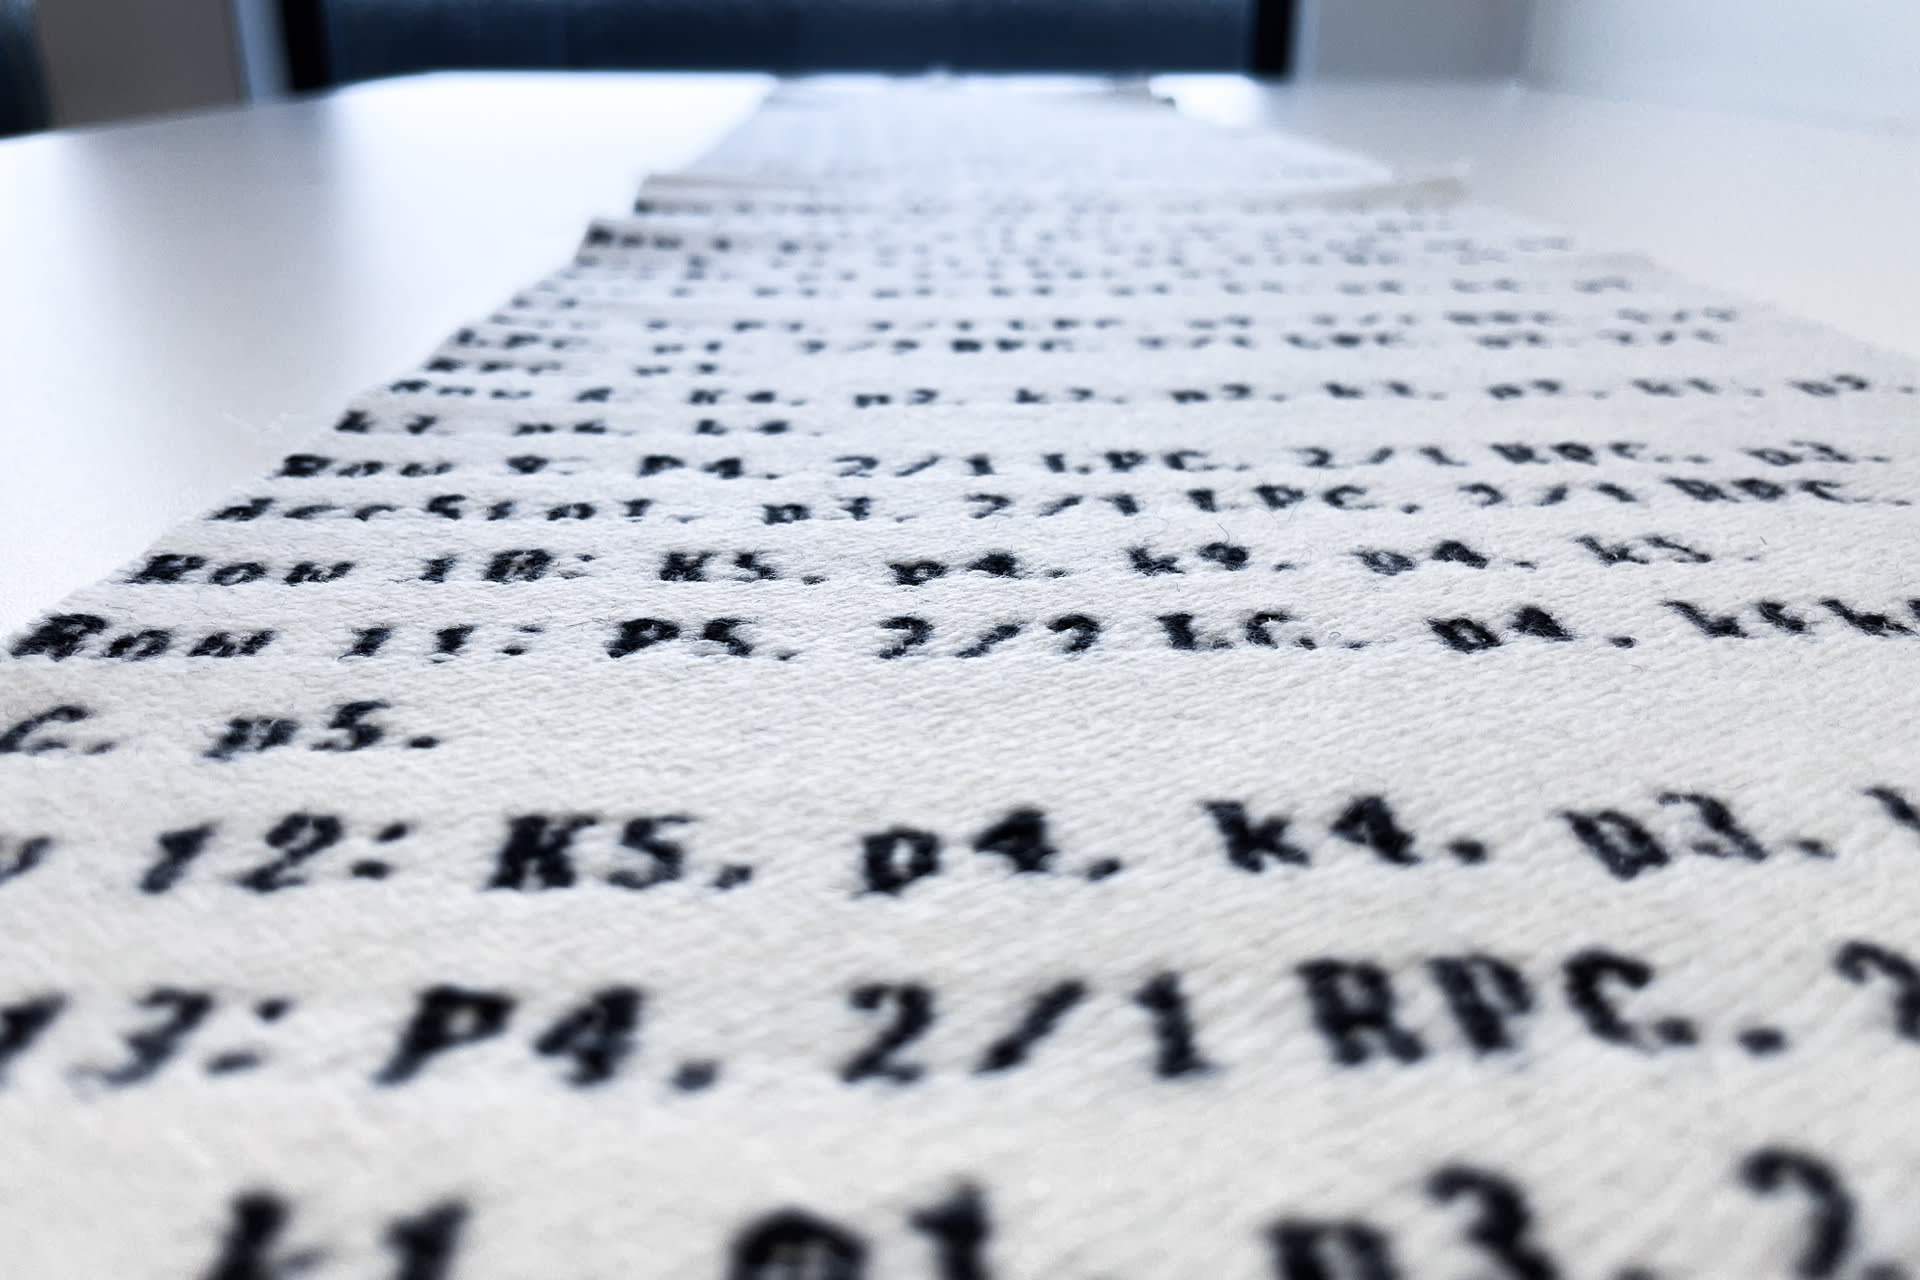 Woven piece of fabric with text woven in